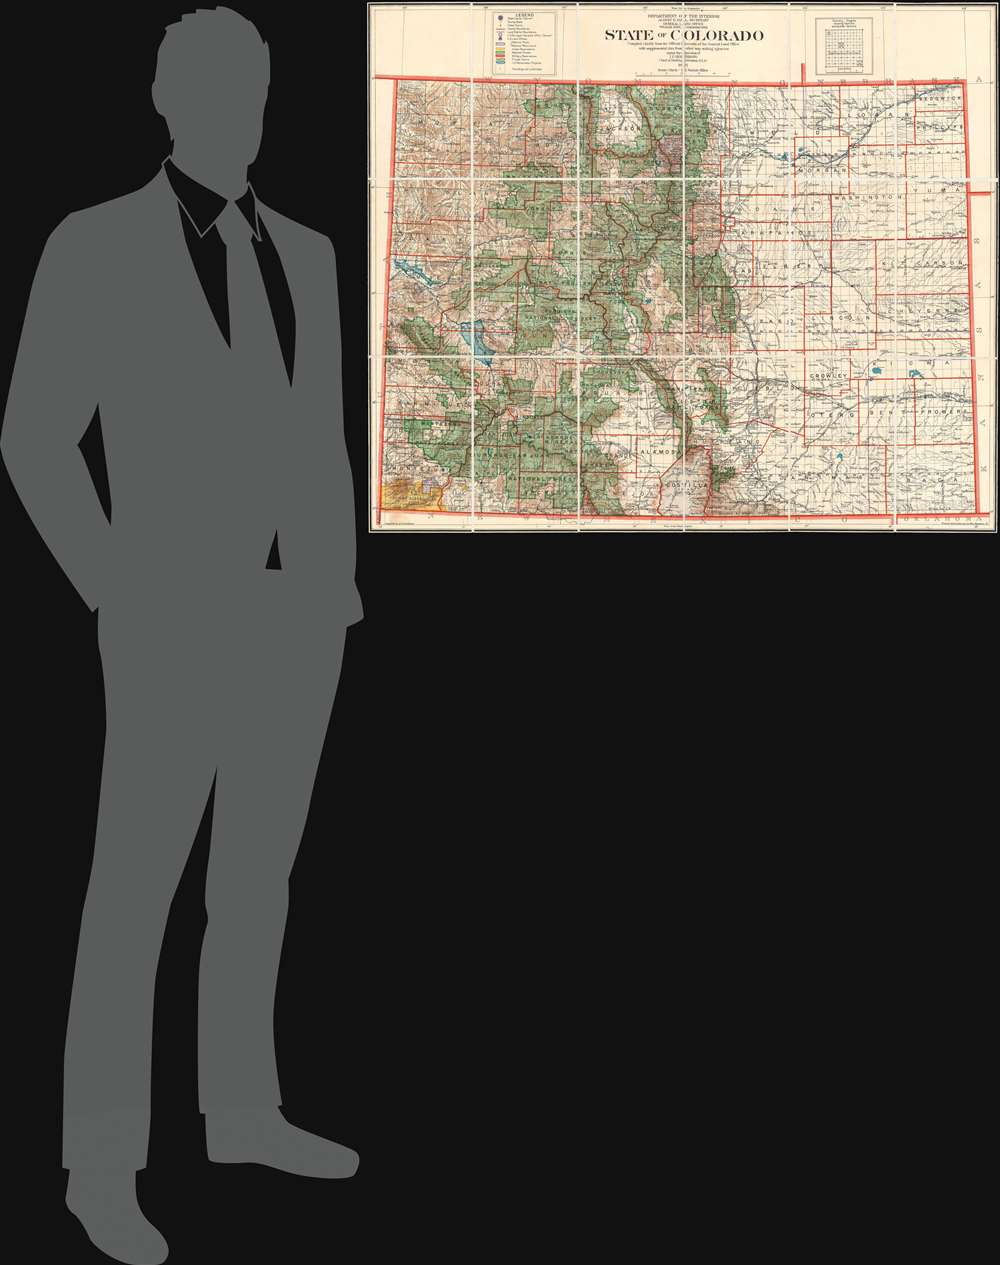 State of Colorado Compiled chiefly from the Official Records of the General Land Office with supplemental data from other map making agencies under the direction of I.P. Berthrong, Chief of Drafting Division, G.L.O. - Alternate View 1